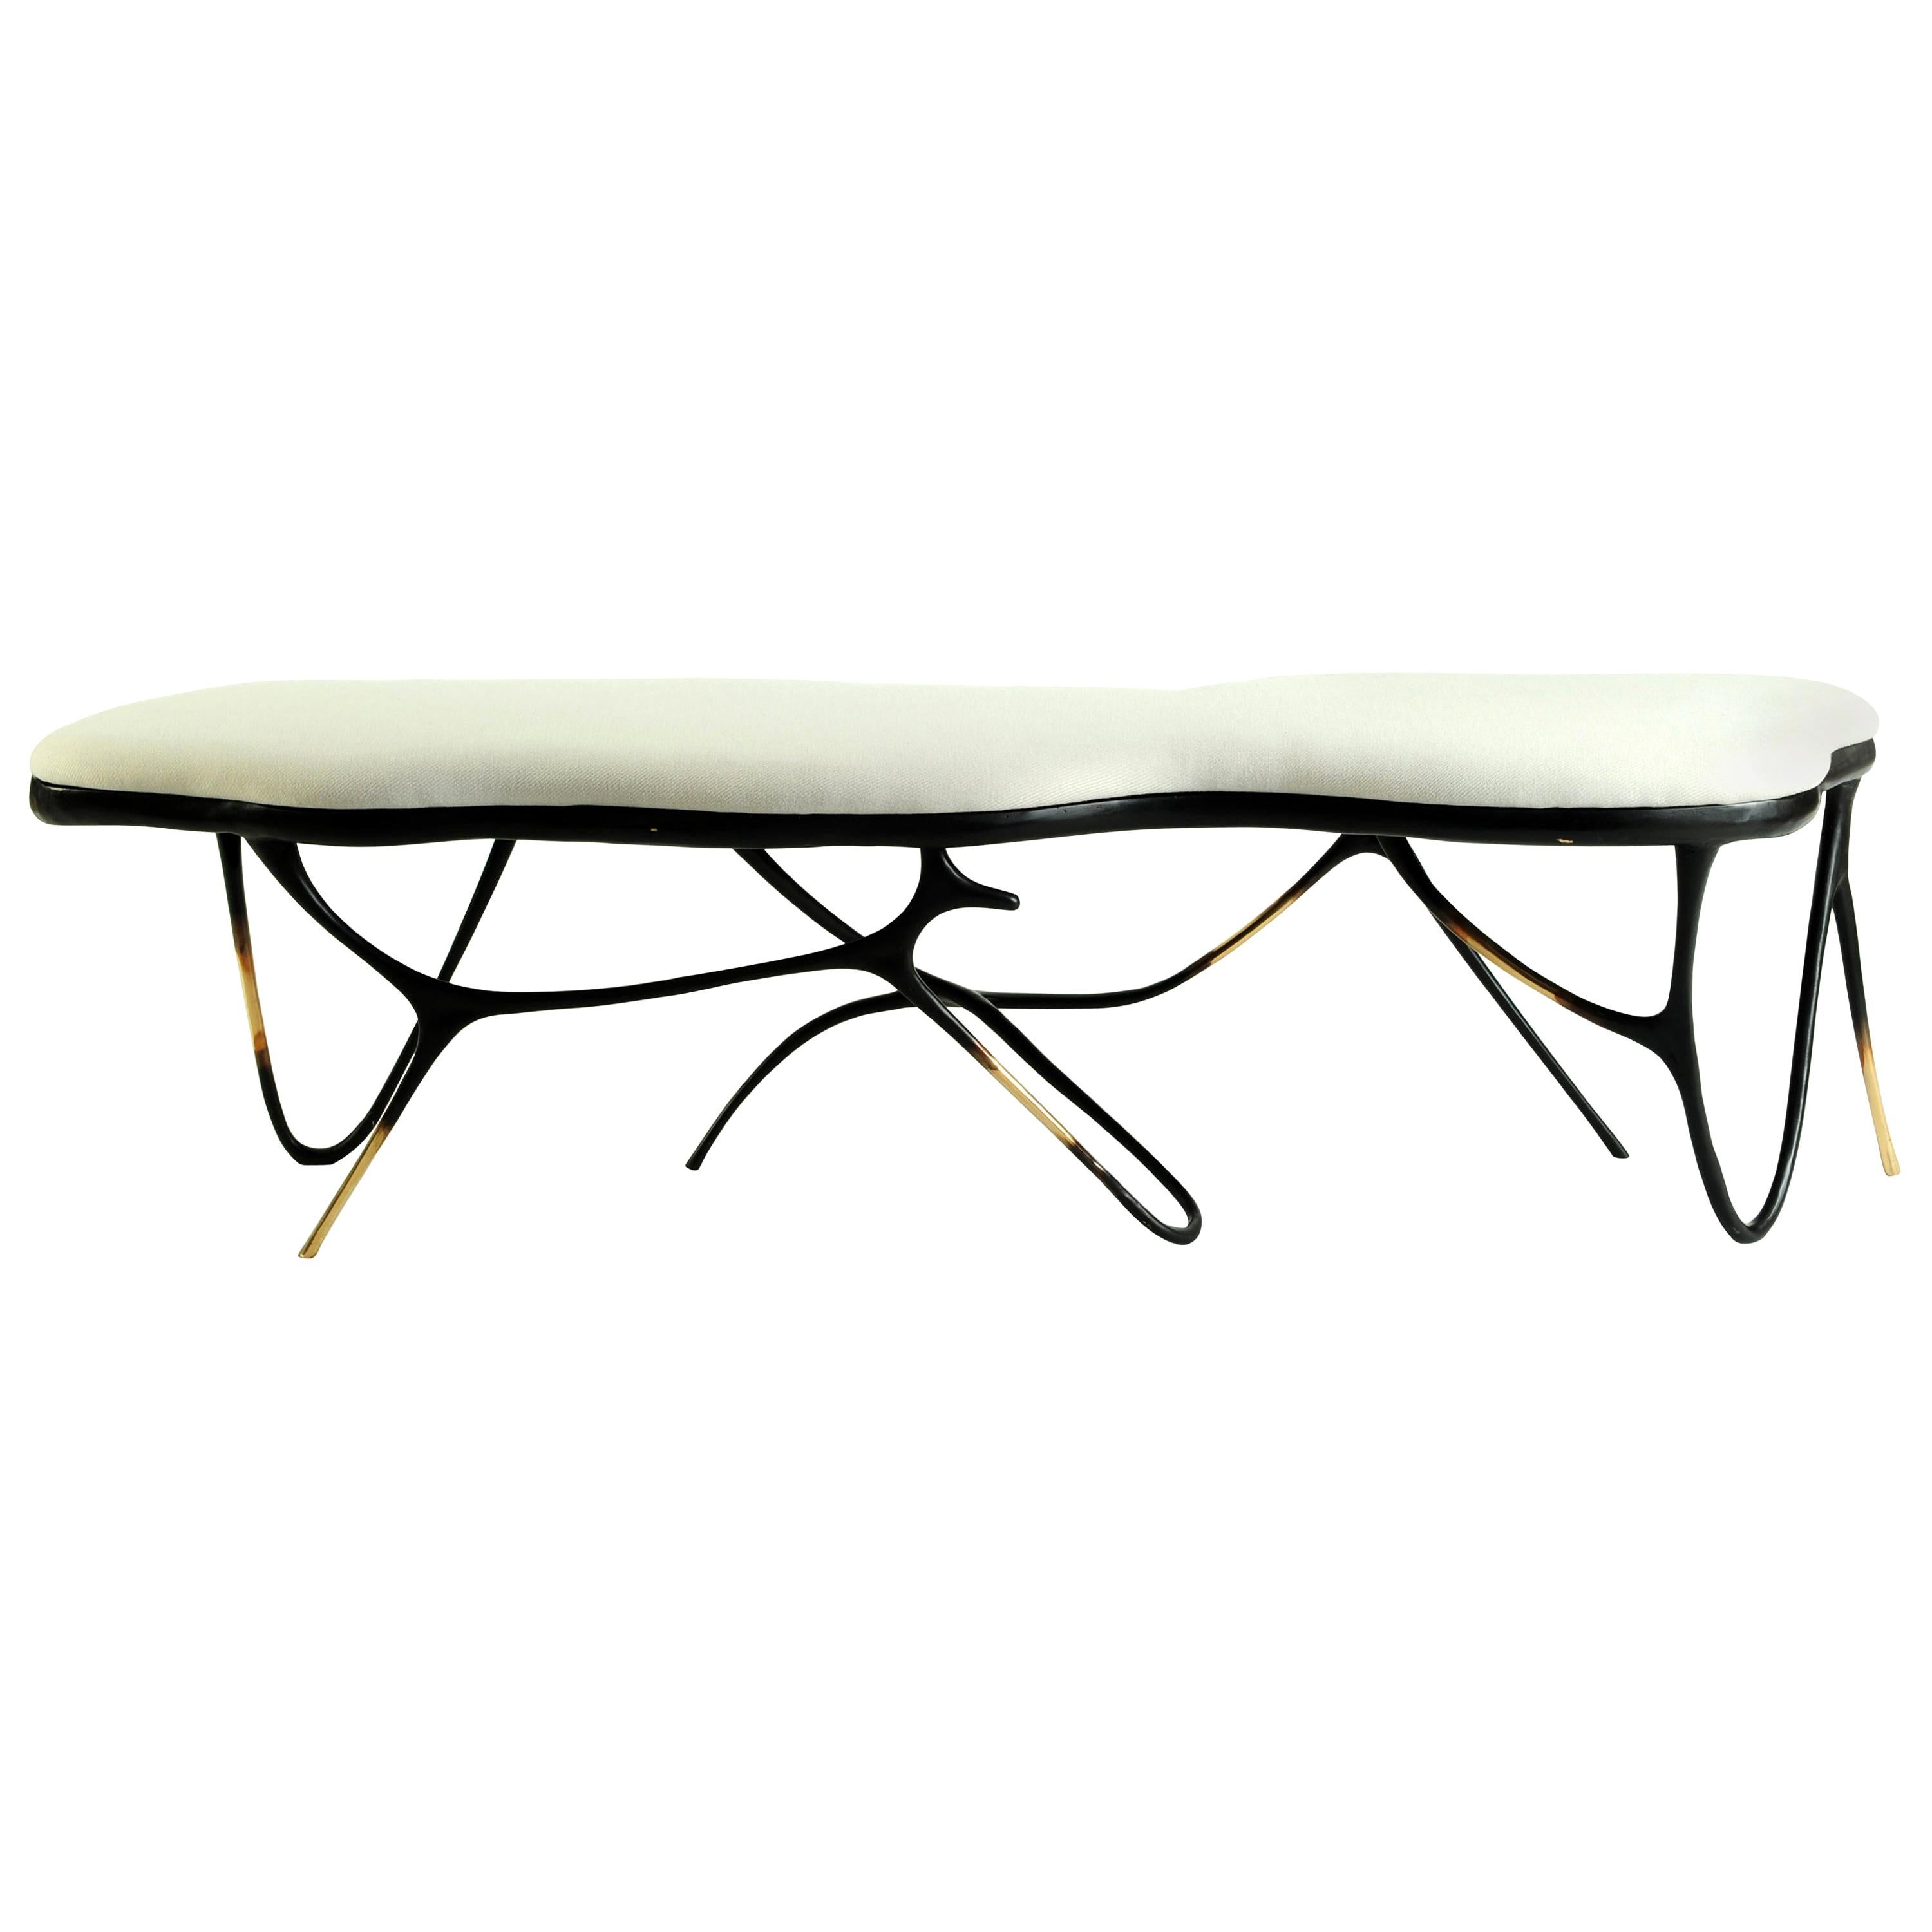 Calligraphic sculpted brass bench by Misaya
Dimensions: W 158 x L 38 x H 40 cm
Hand-sculpted brass table.

Misaya emulates Chinese ink paintings through the process of lost-wax casting.

Each piece in the Ink collection, which consists of a